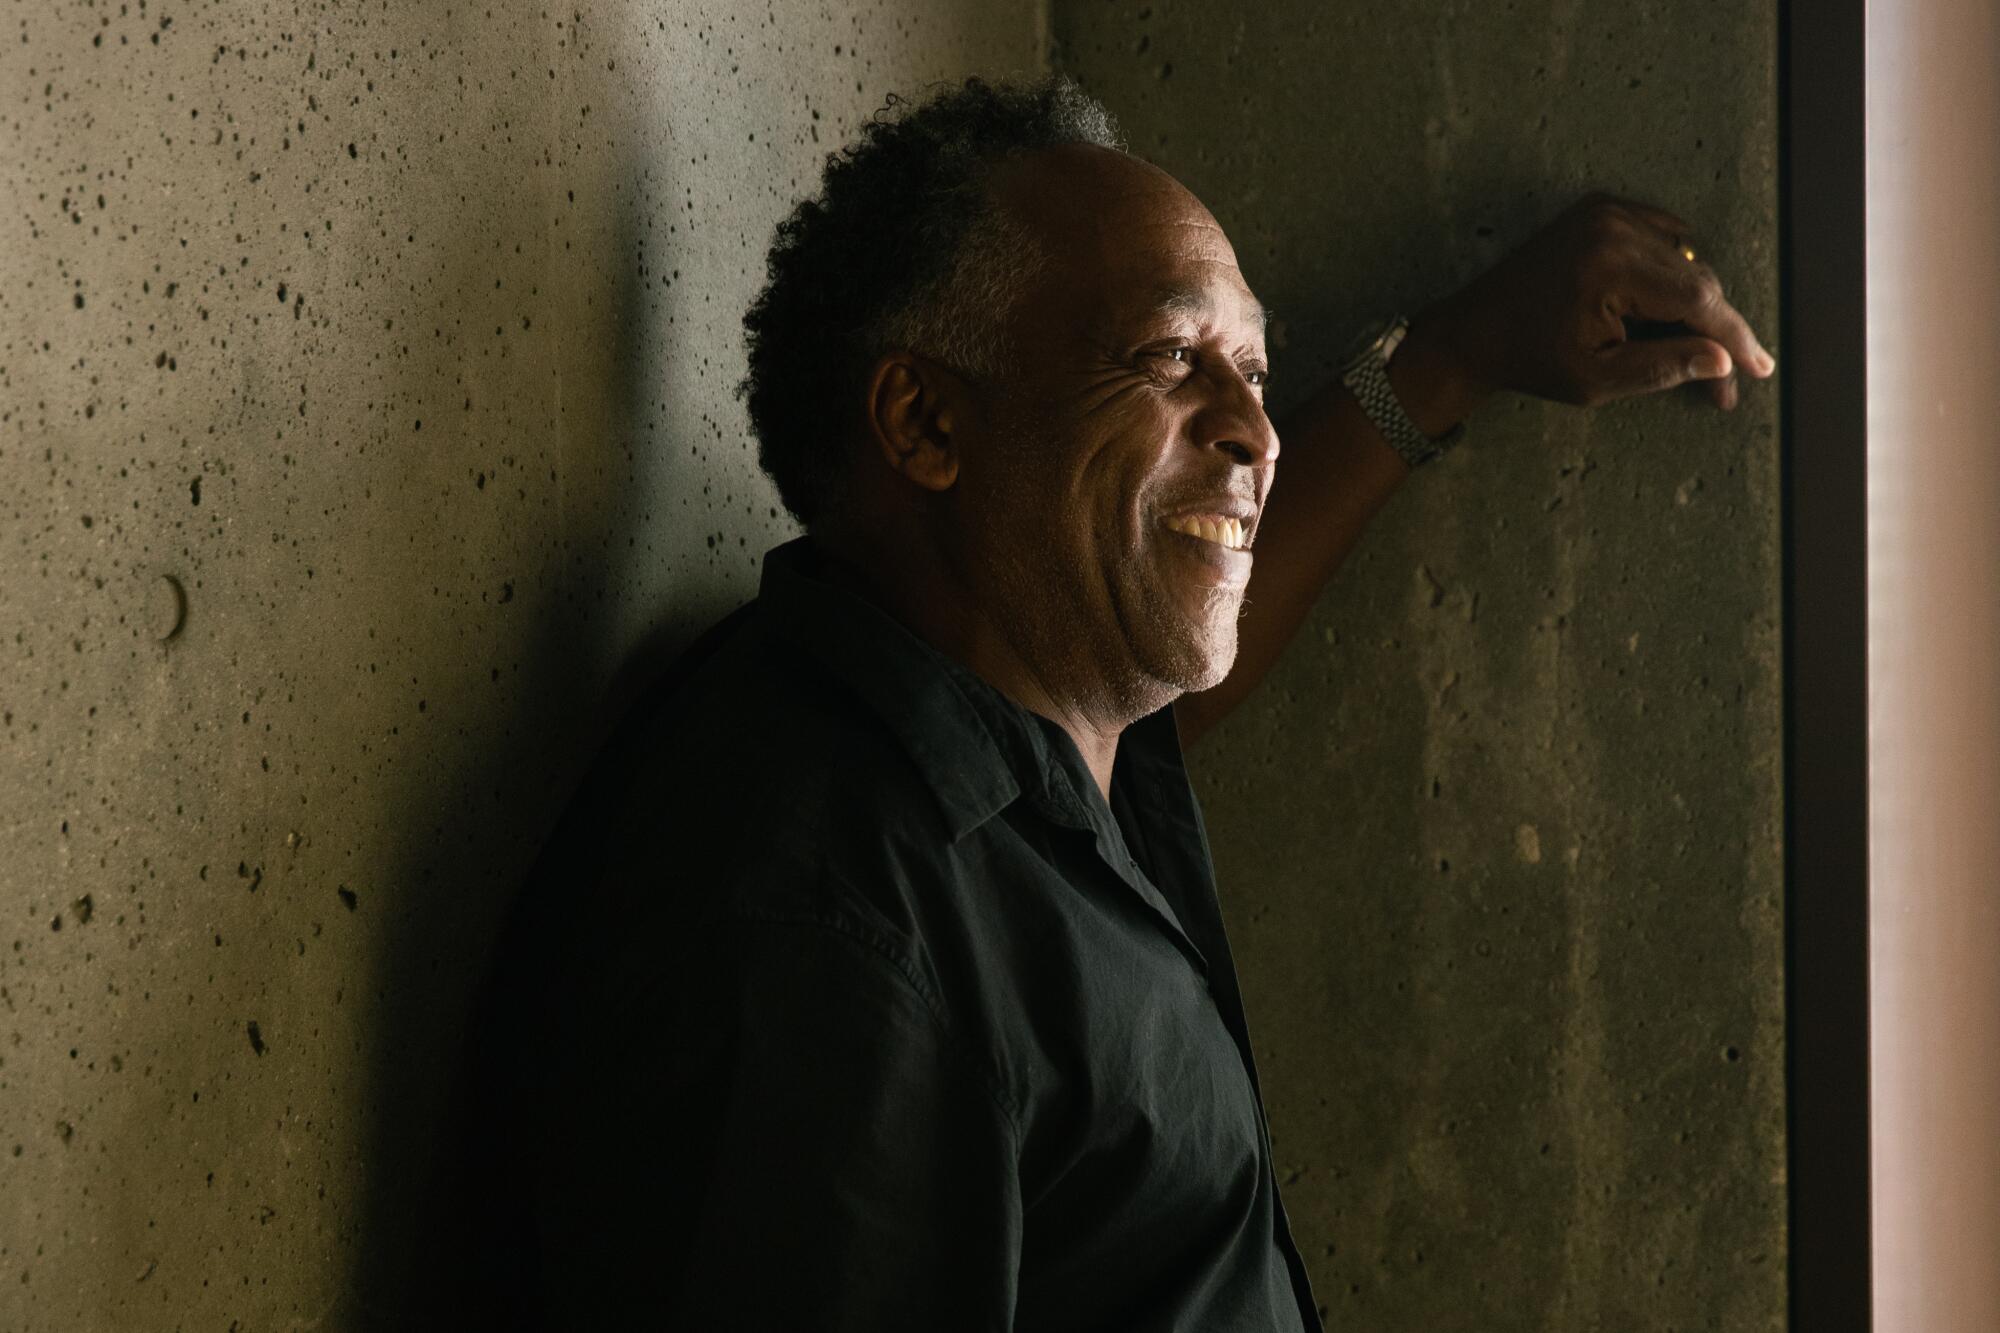 Henry Taylor wearing a black shirt and leaning on a concrete wall, his face illuminated by sunlight